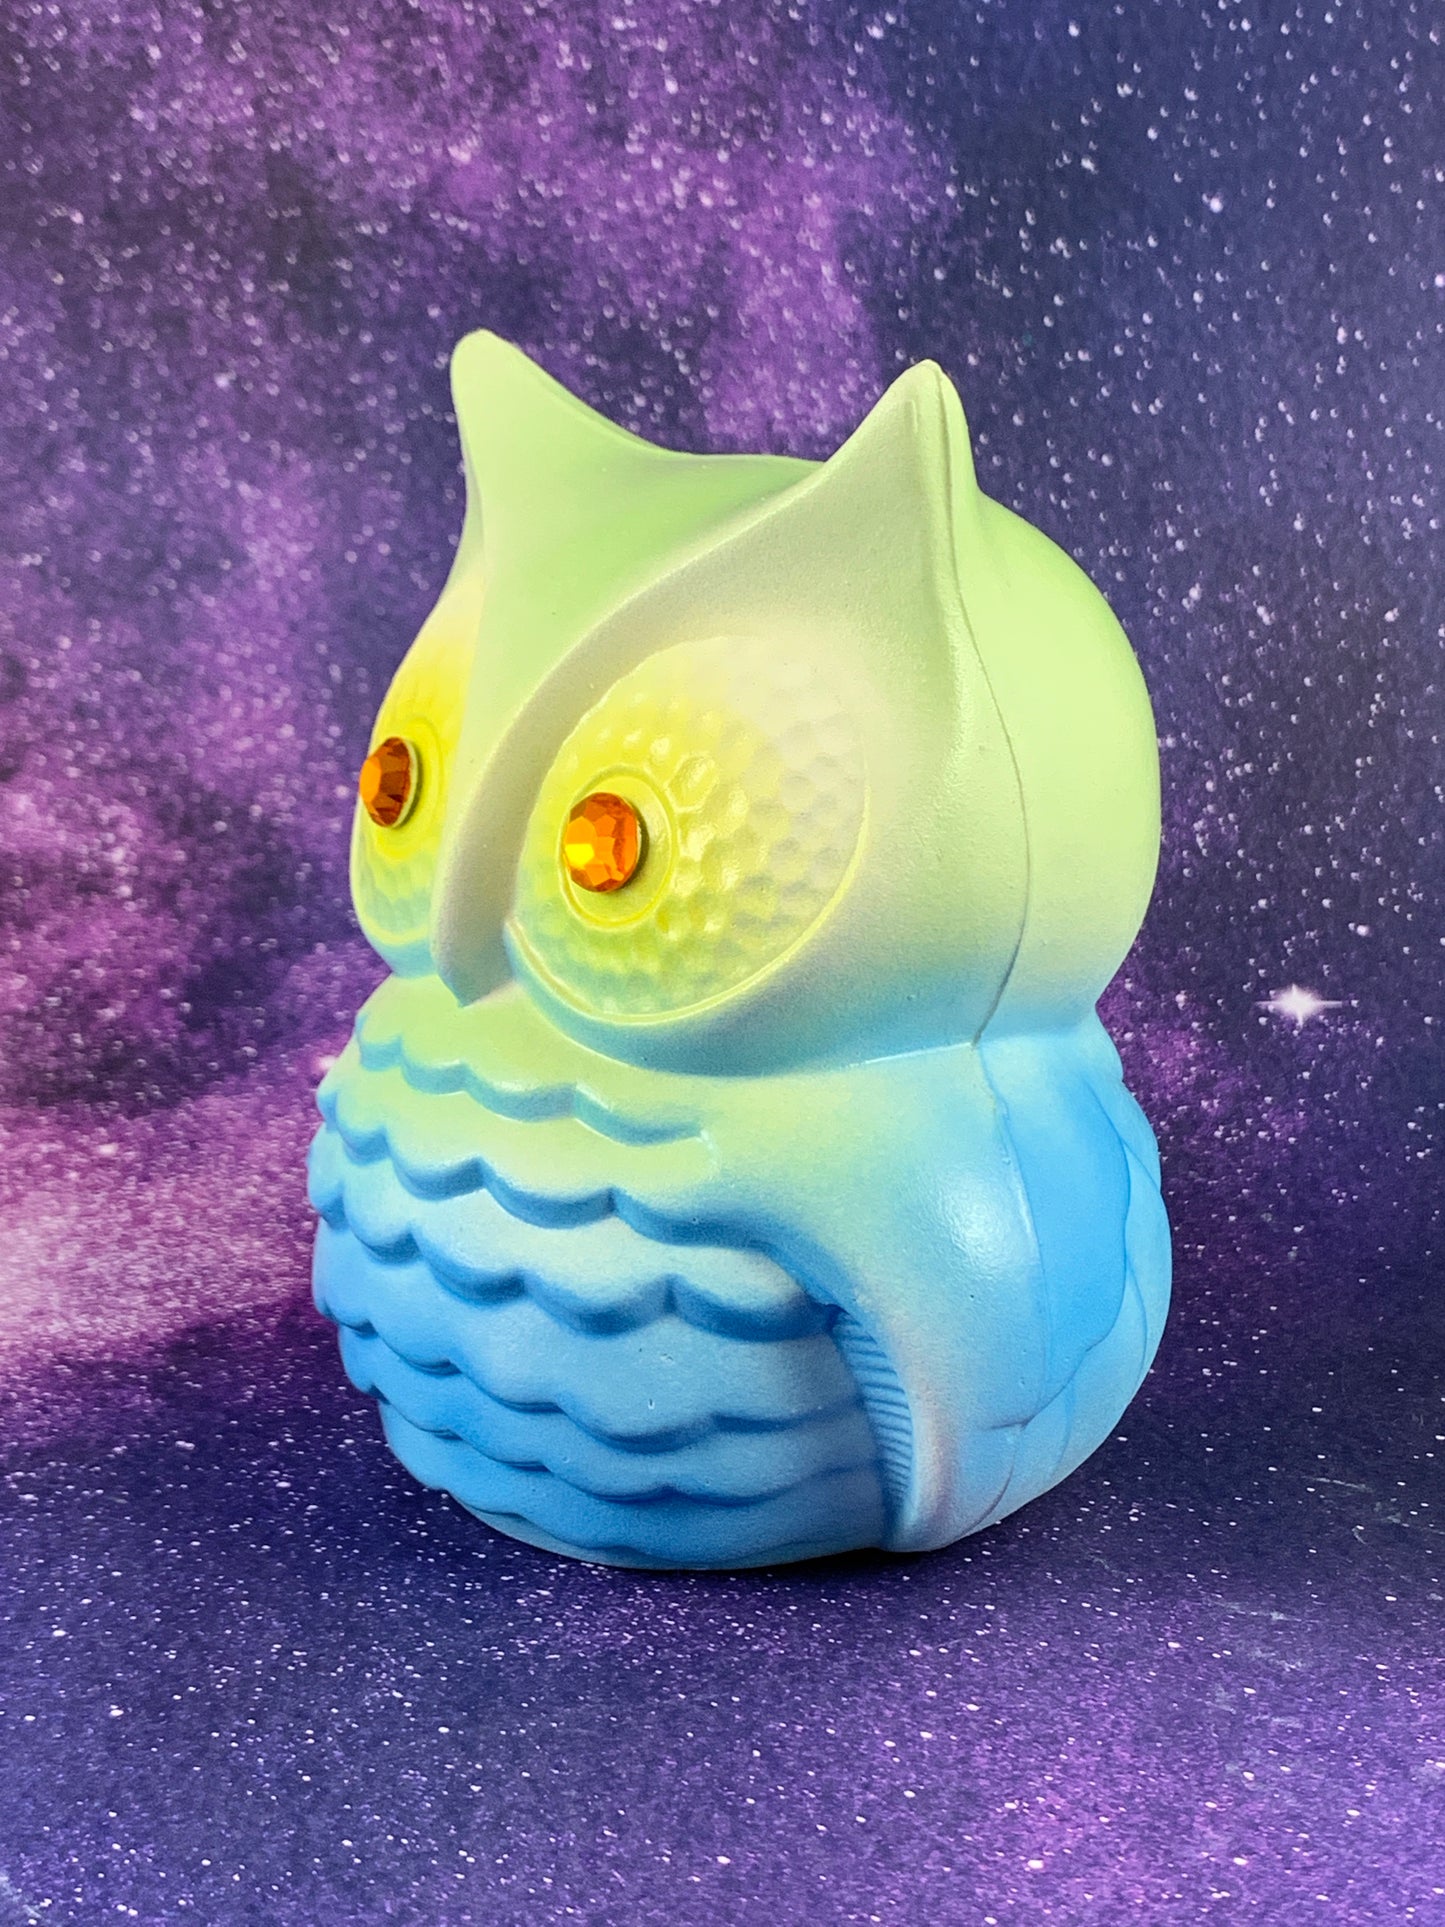 Mysterious Owl: Blue, Green and Yellow